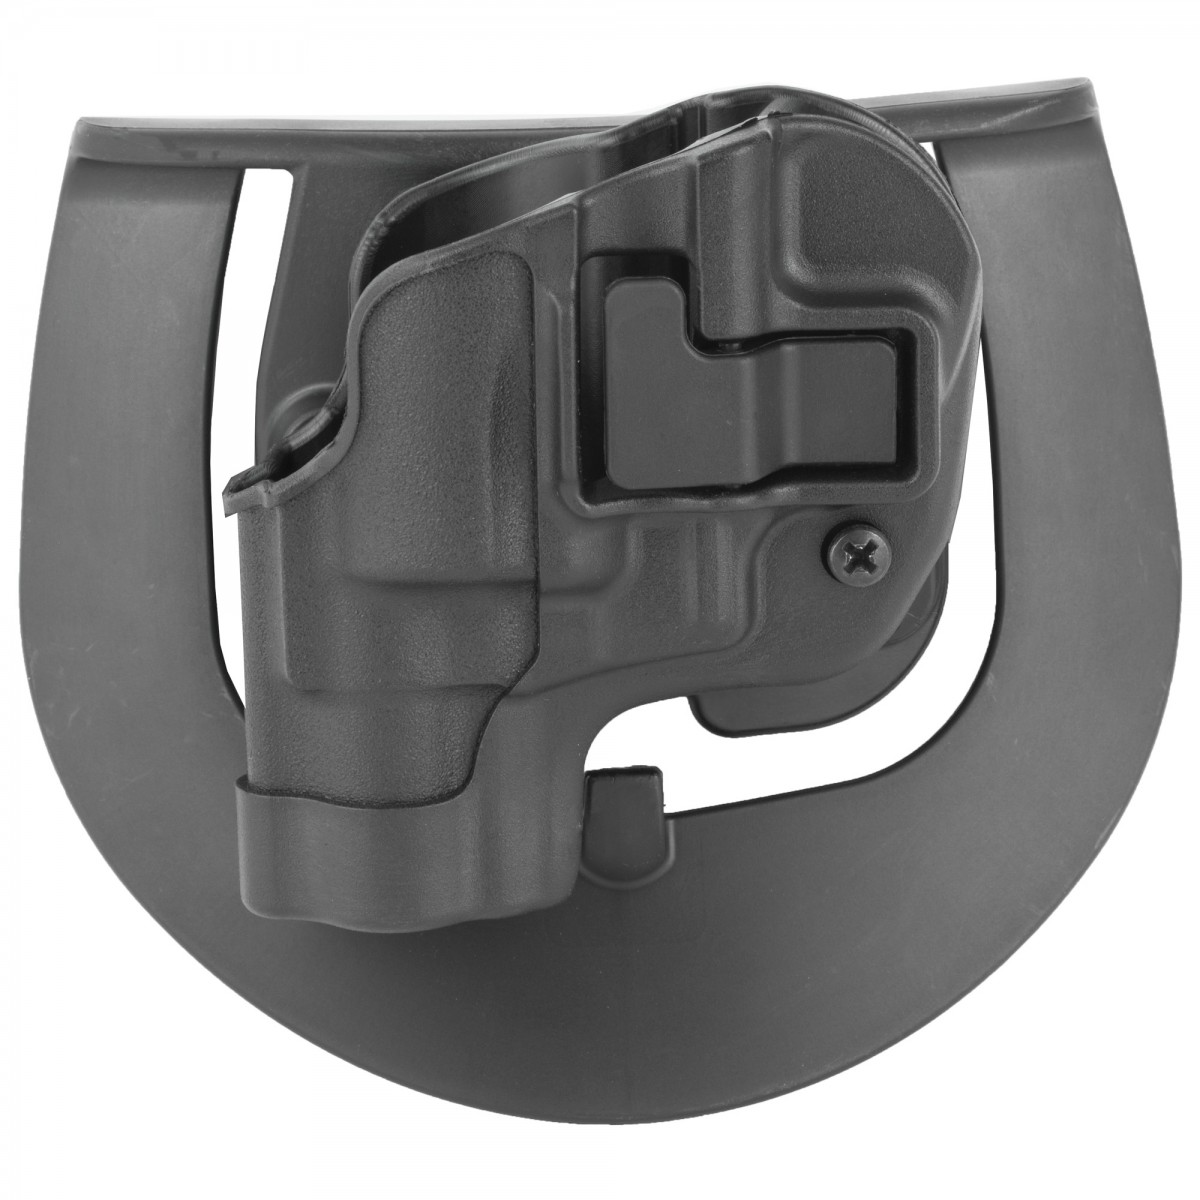 Blackhawk CQC Serpa Holster with Belt and Paddle Attachments for J-Frame  Revolvers with 2 Barrels